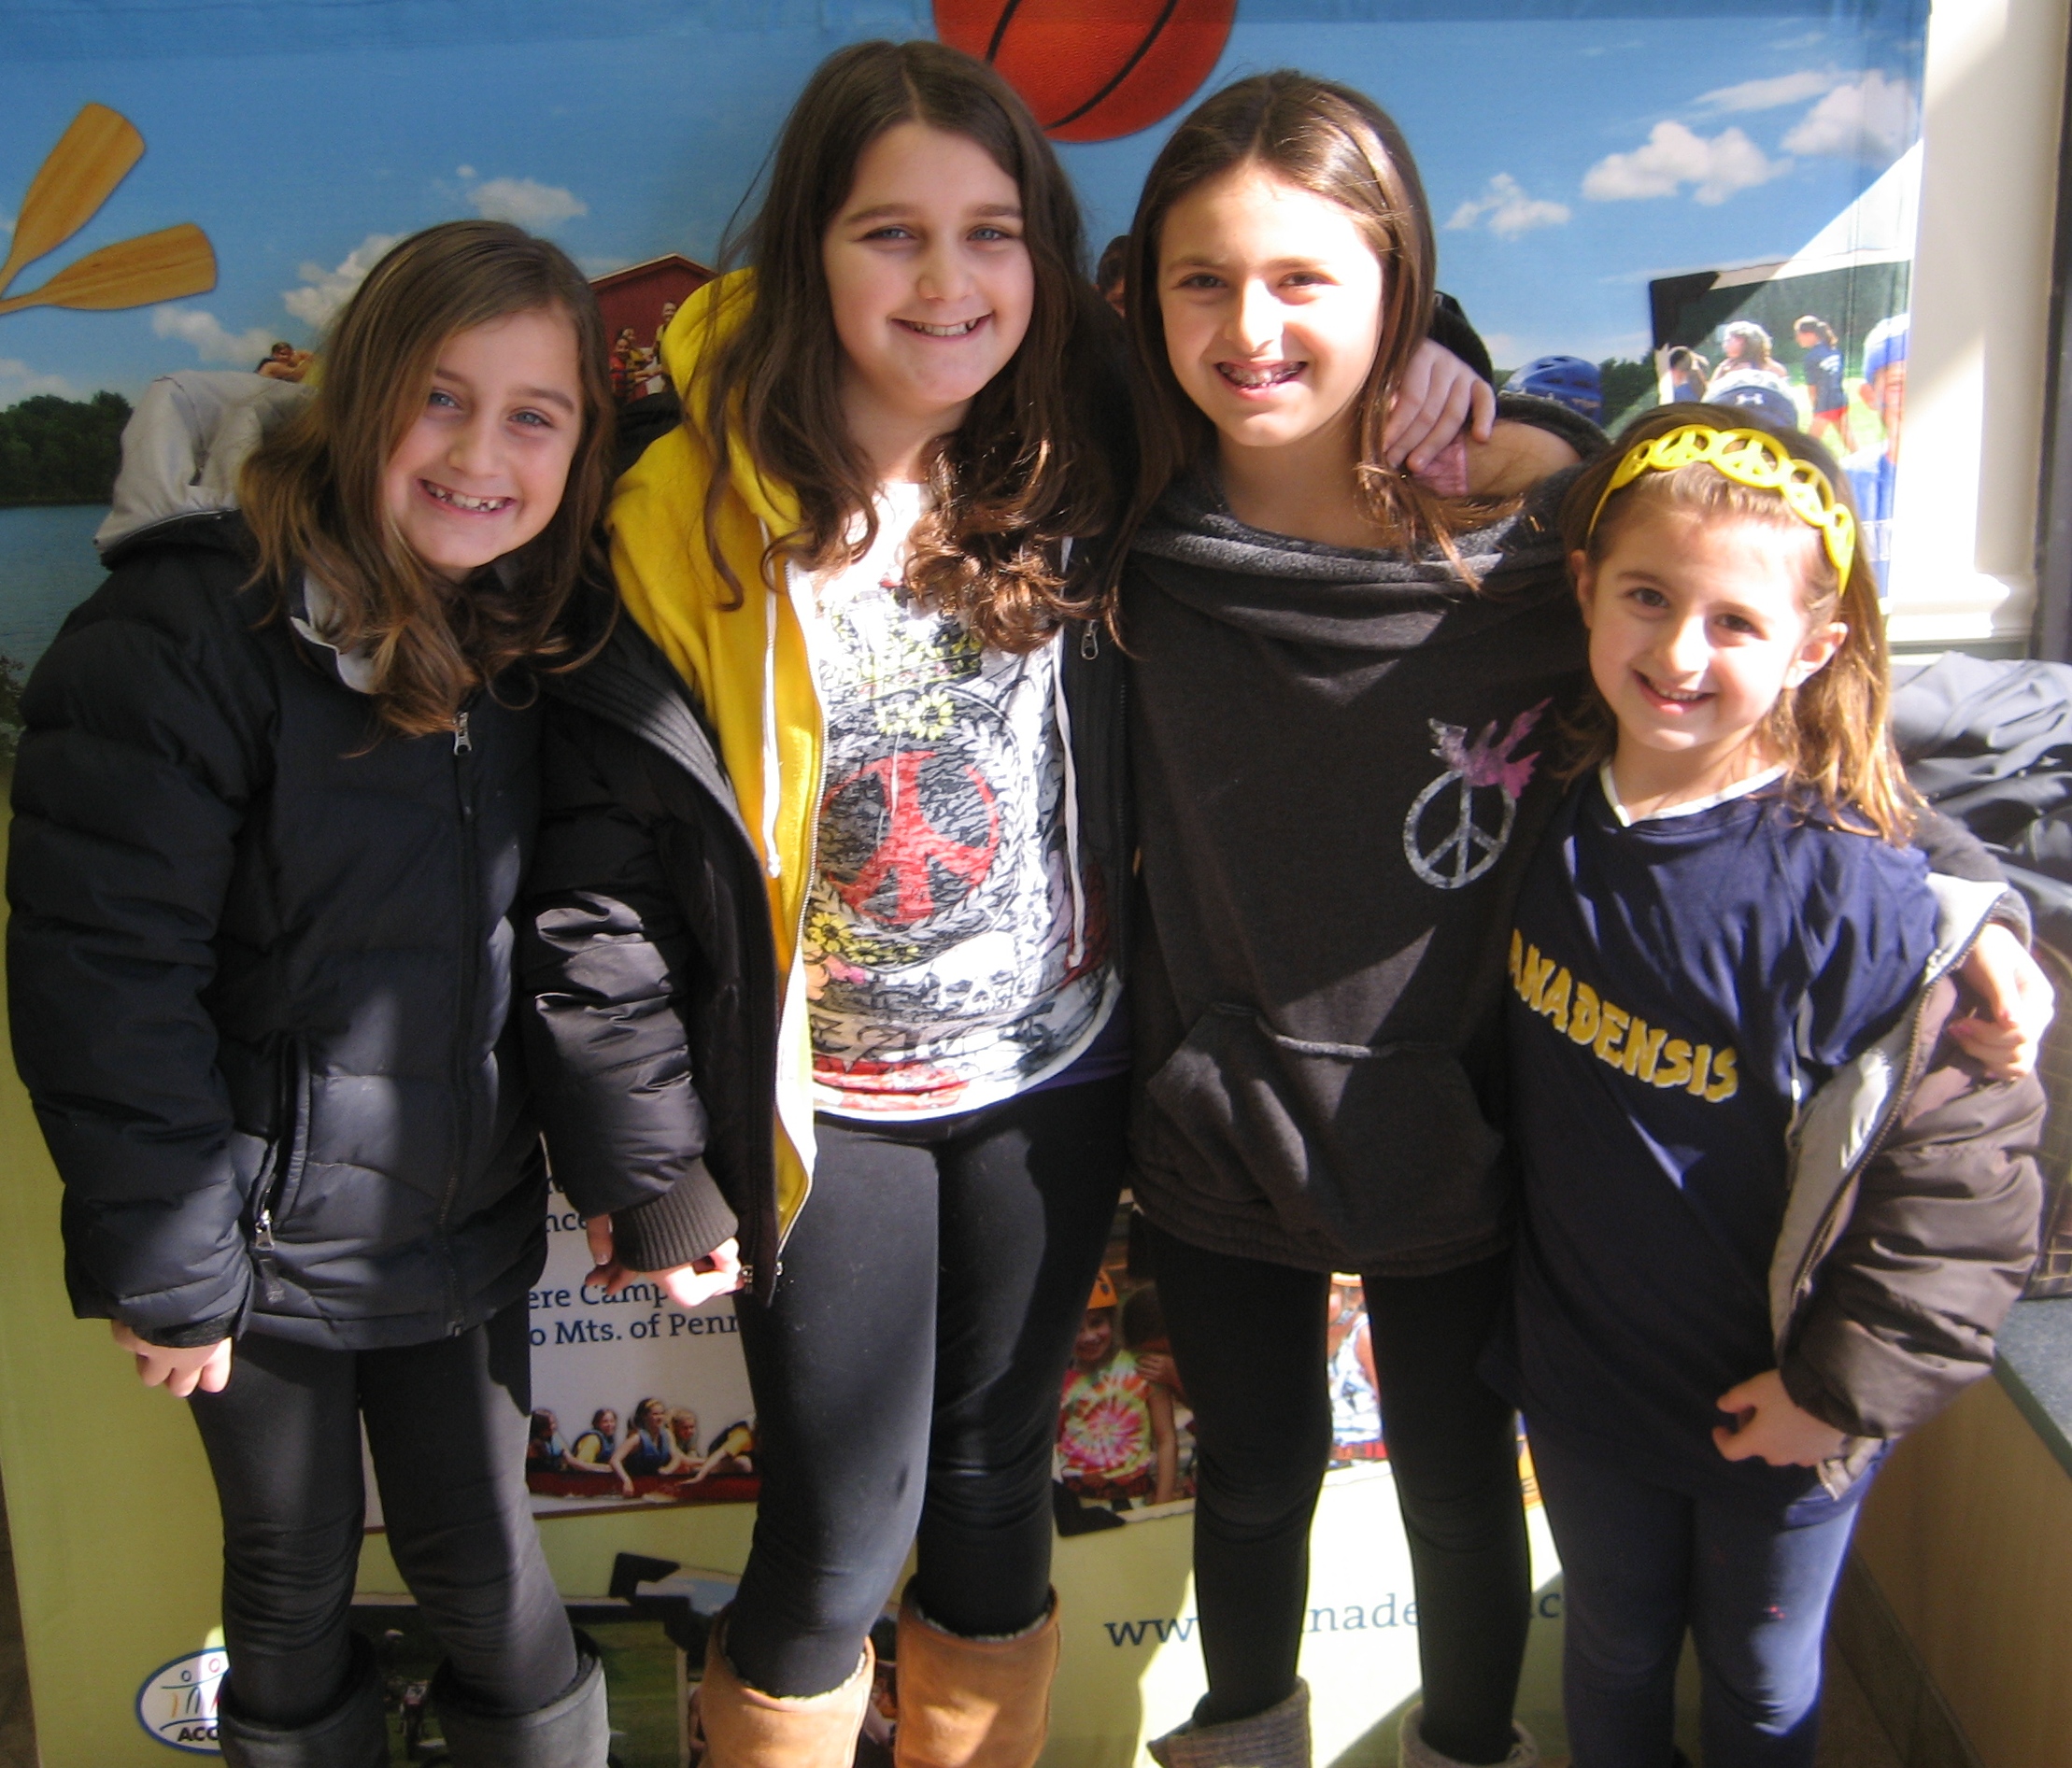 Campers Lindsay Reiter and Ali Beyda with younger sisters and future campers Carly and Caitlin.  